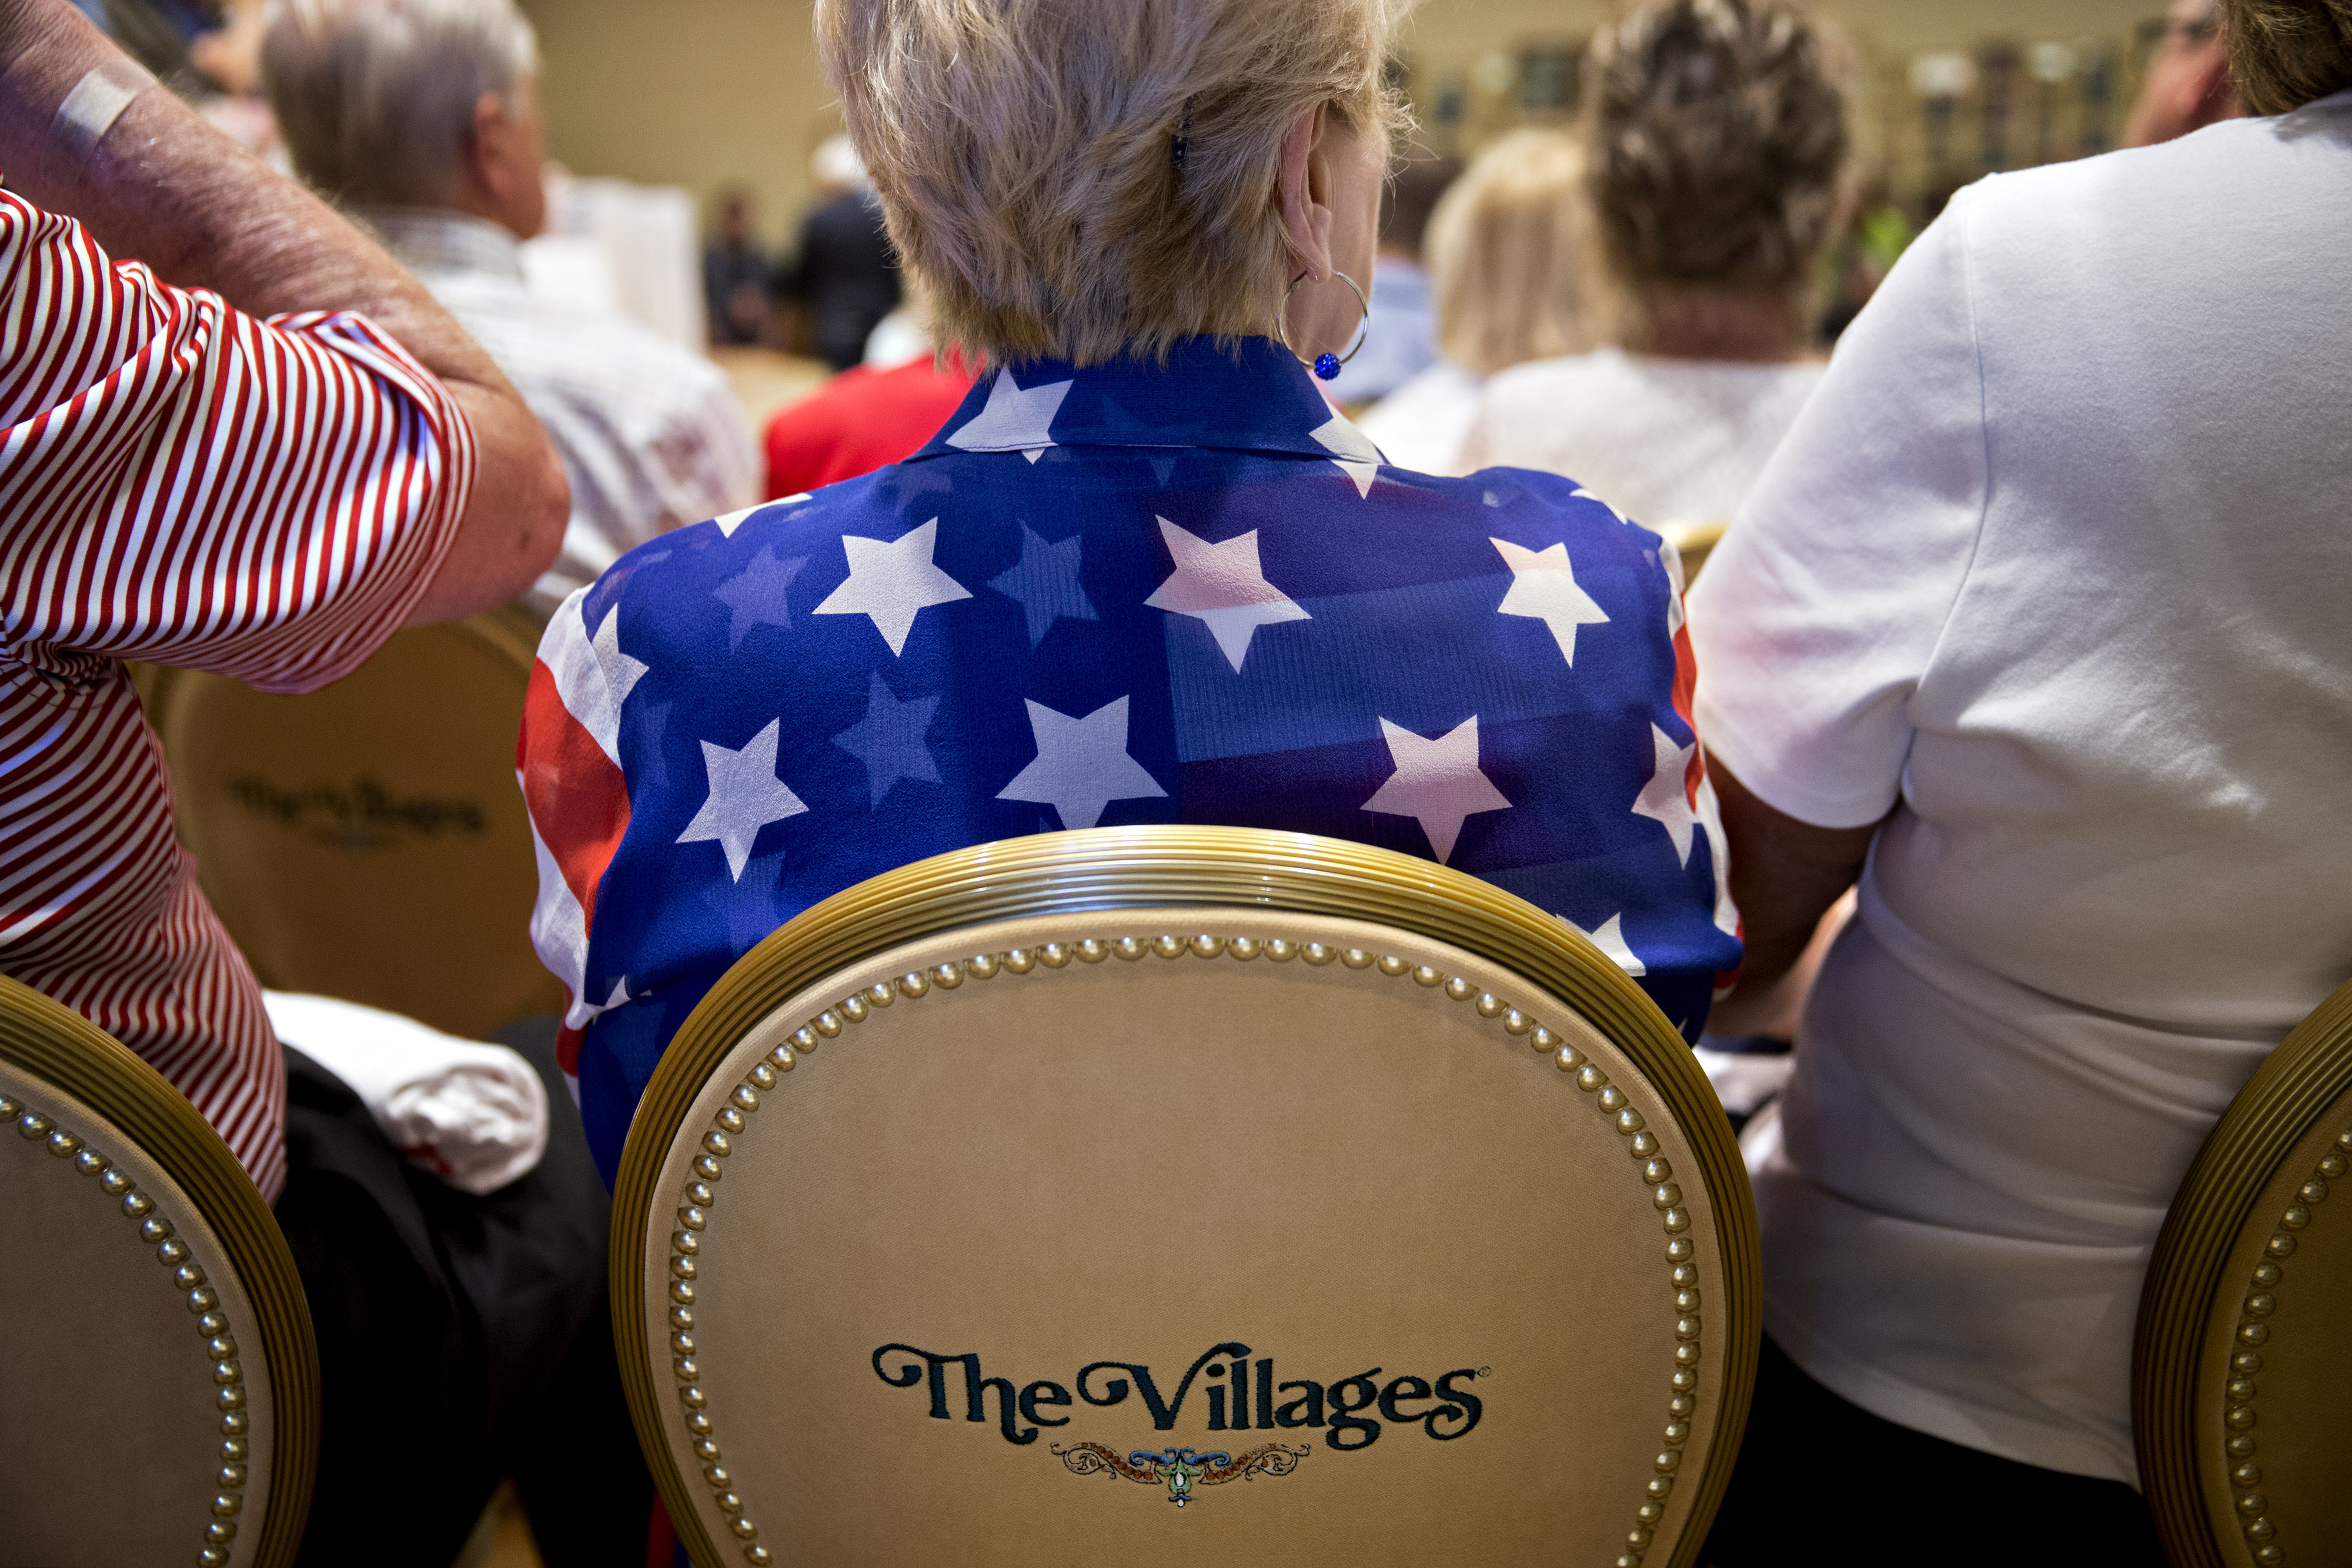 An attendee wears an American flag themed shirt before a campaign rally with Sen. Marco Rubio, then a 2016 presidential candidate, at the Rohan Recreation Center in The Villages, Florida, on Sunday, March 13, 2016.